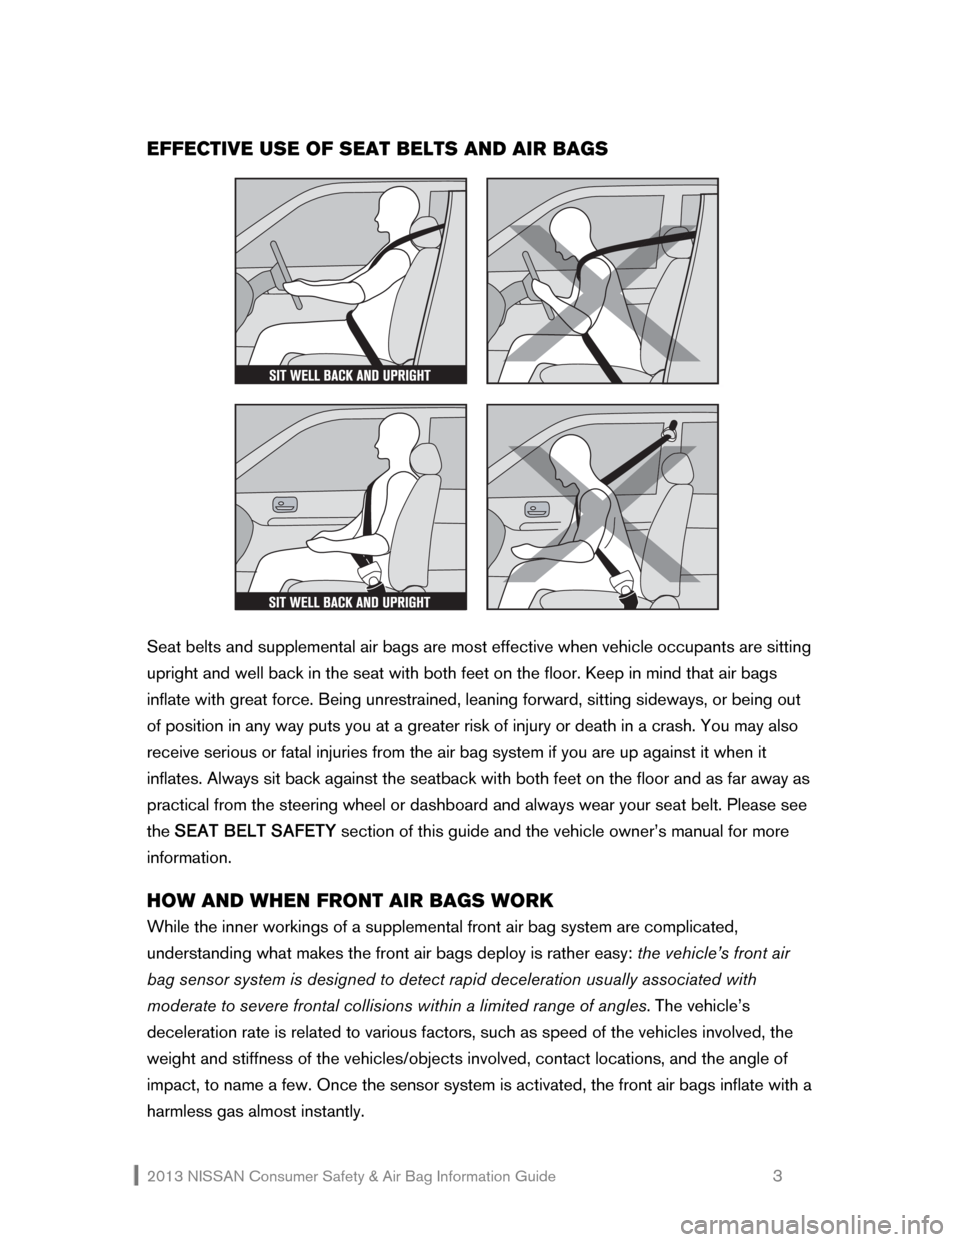 NISSAN SENTRA 2013 B17 / 7.G Consumer Safety Air Bag Information Guide 2013 NISSAN Consumer Safety & Air Bag Information Guide                                                   3 
EFFECTIVE USE OF SEAT BELTS AND AIR BAGS 
 
 
 
Seat belts and supplemental air bags are mo